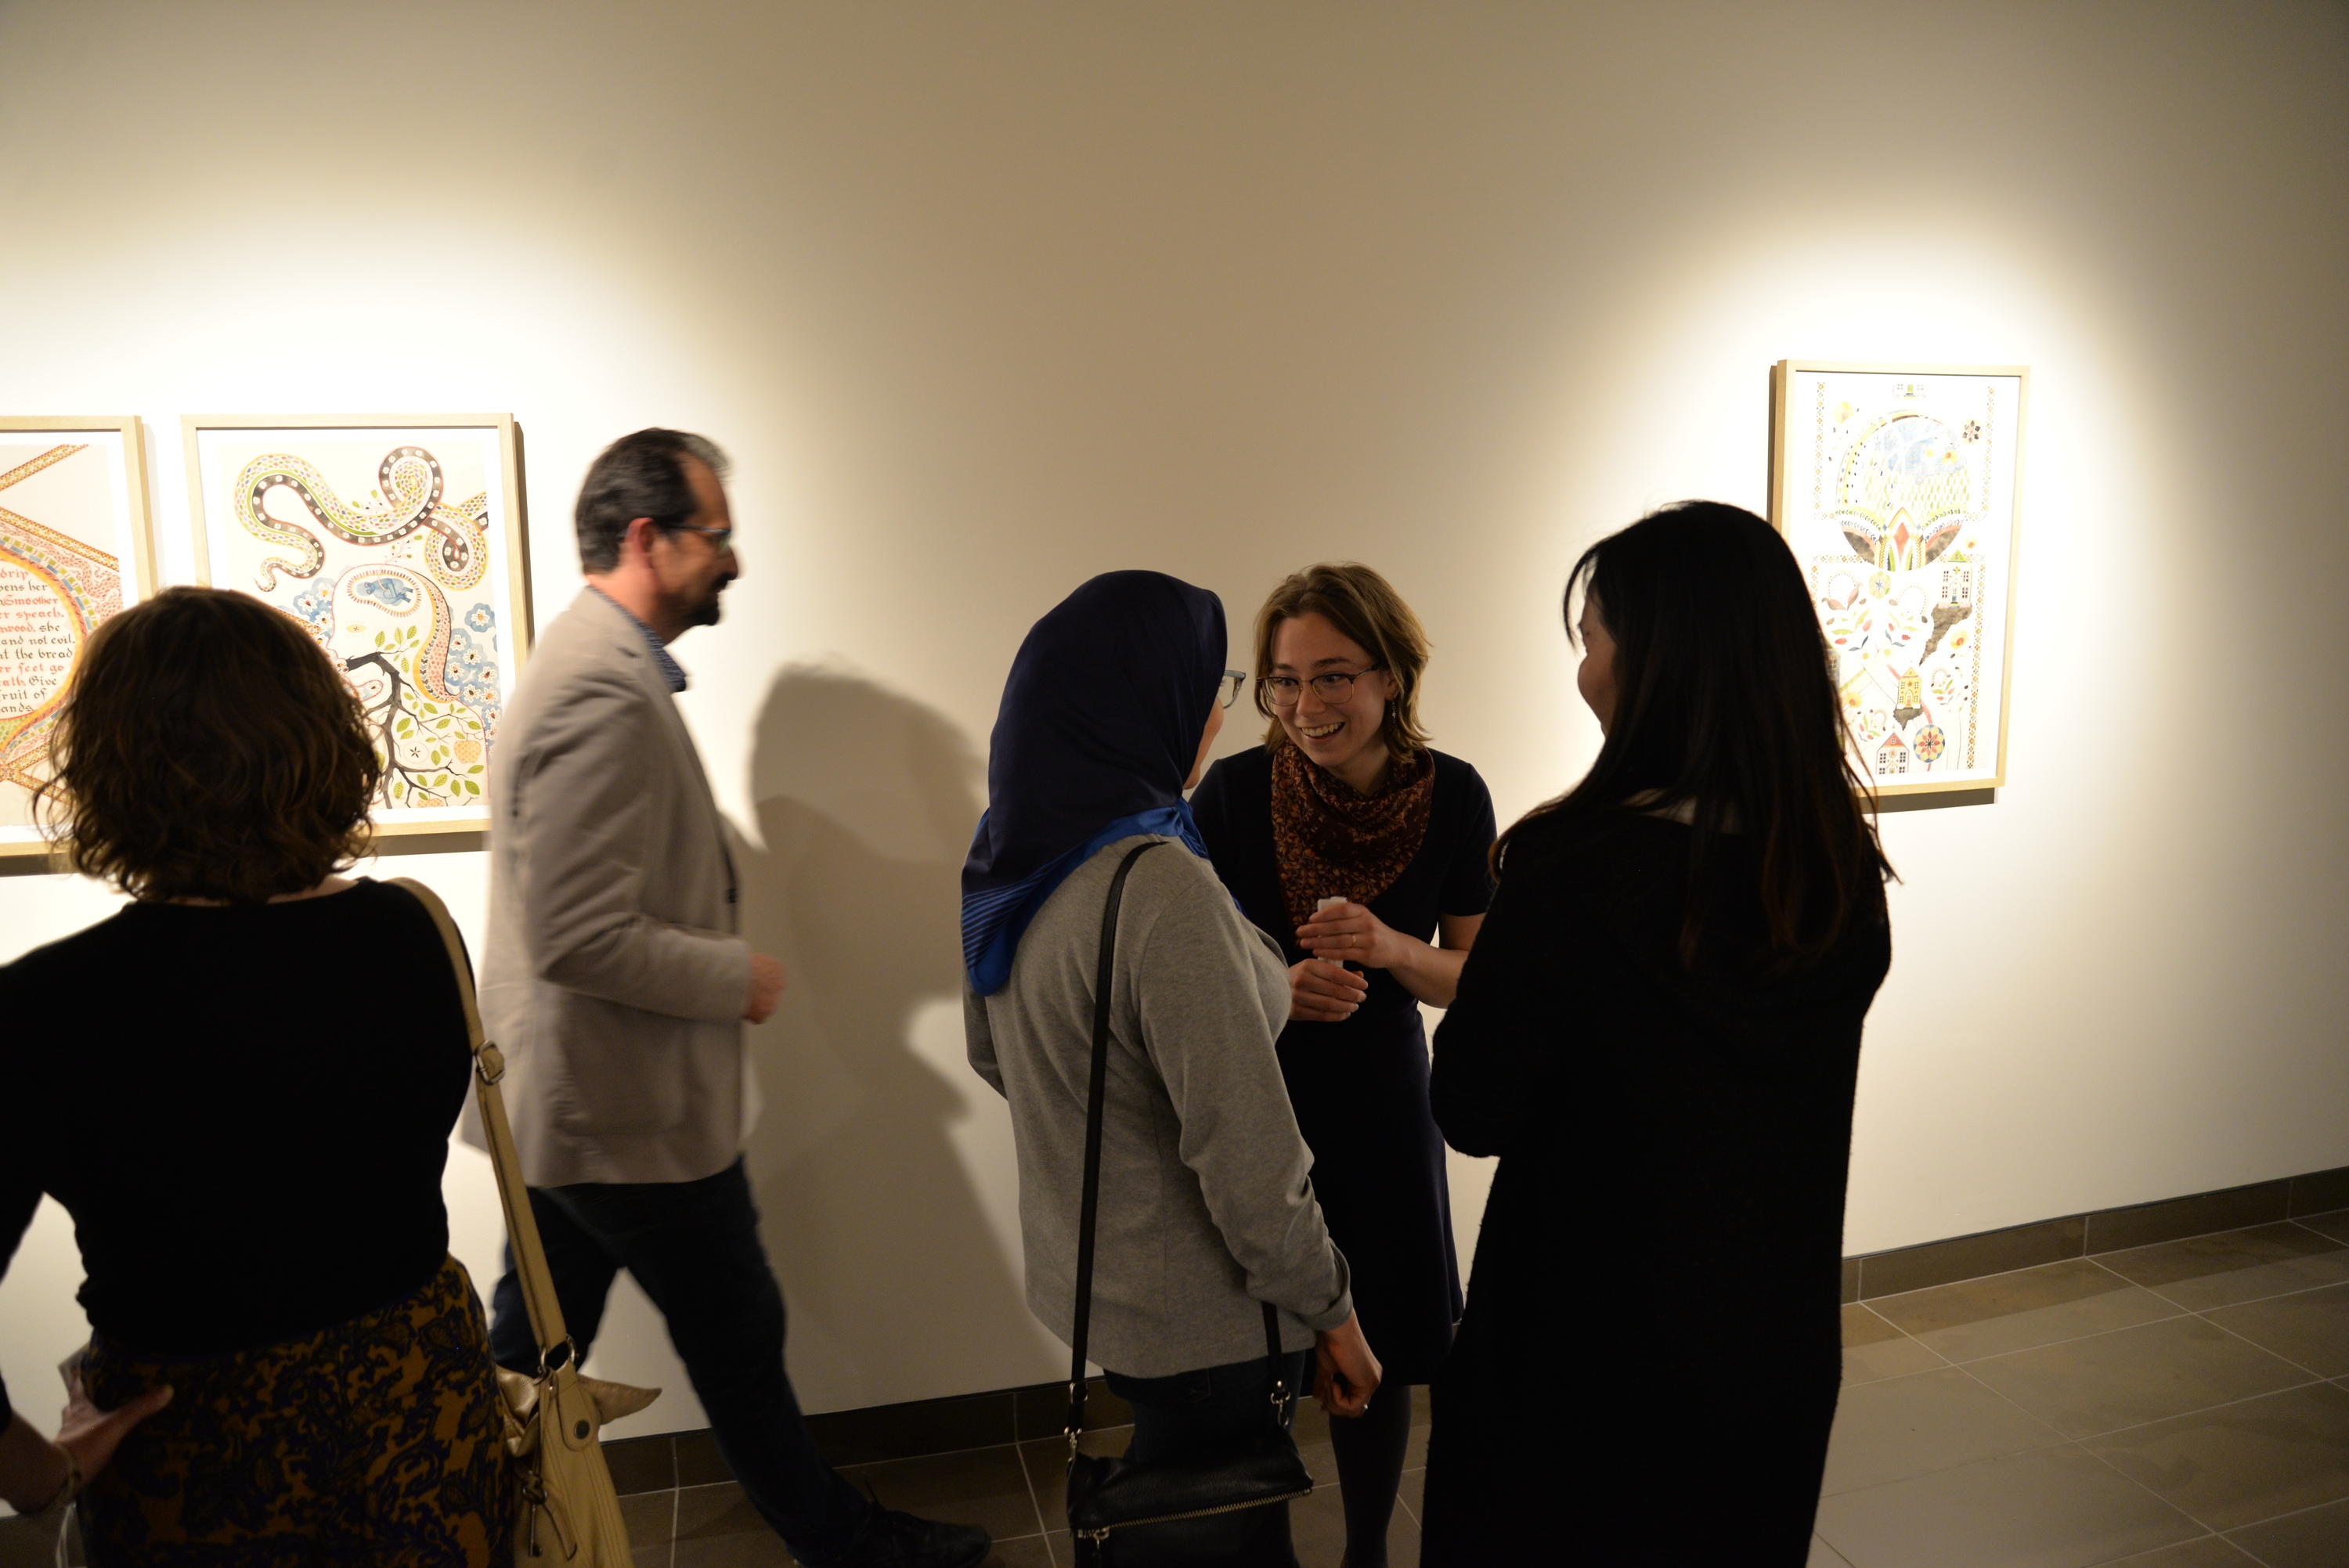 Mag Harder and Soheila Esfahani meeting in the exhibit launch